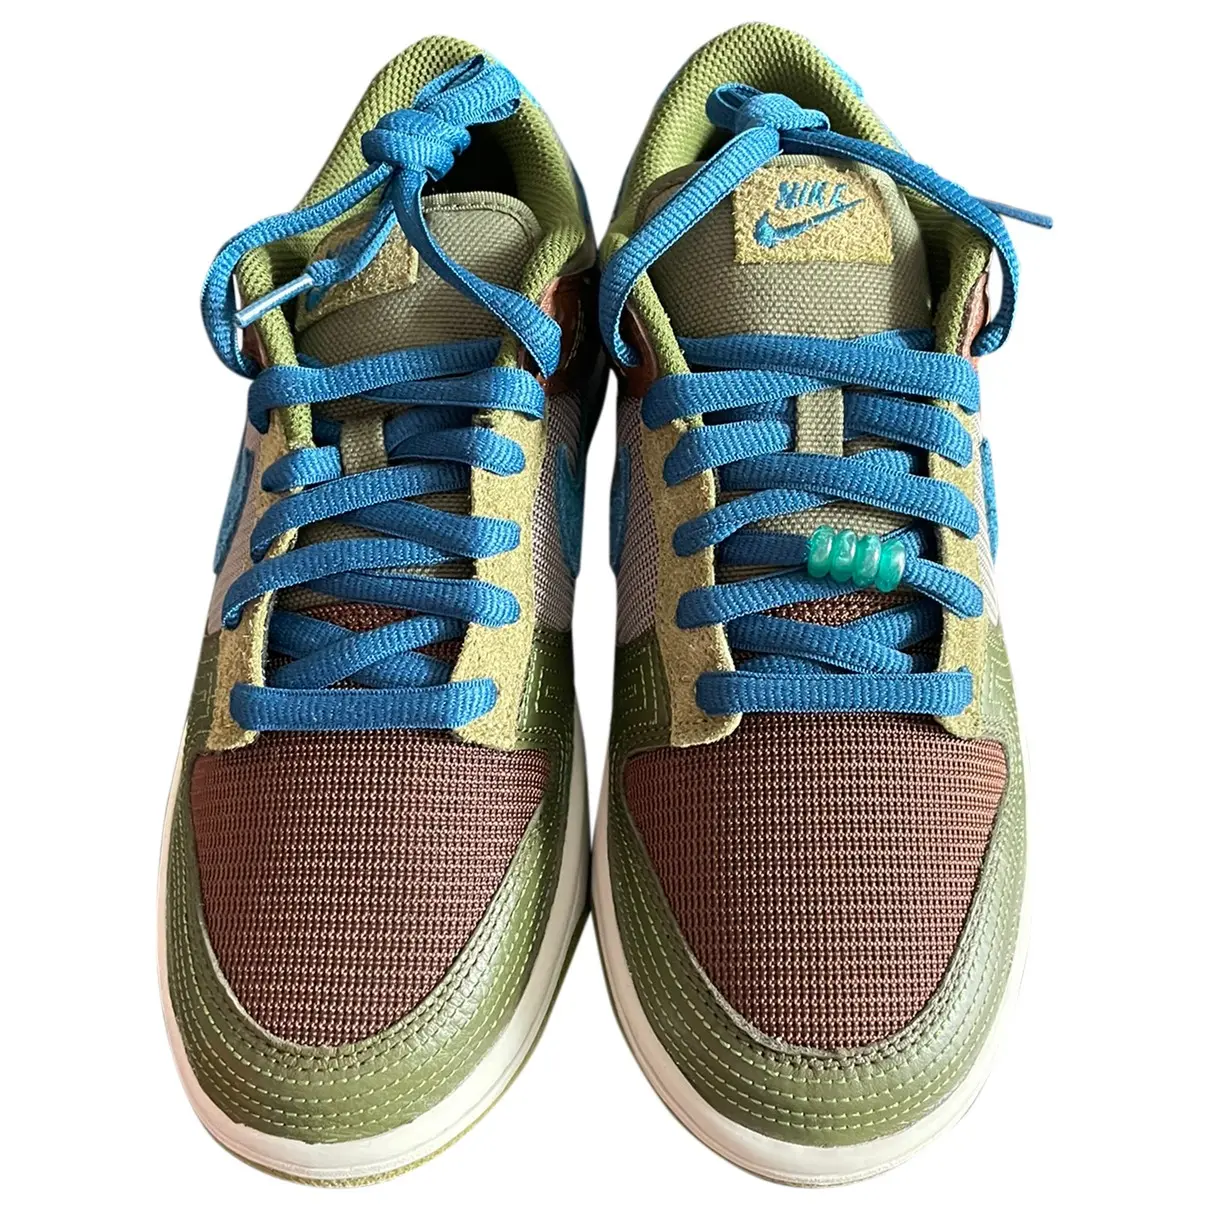 SB Dunk Low leather trainers Nike